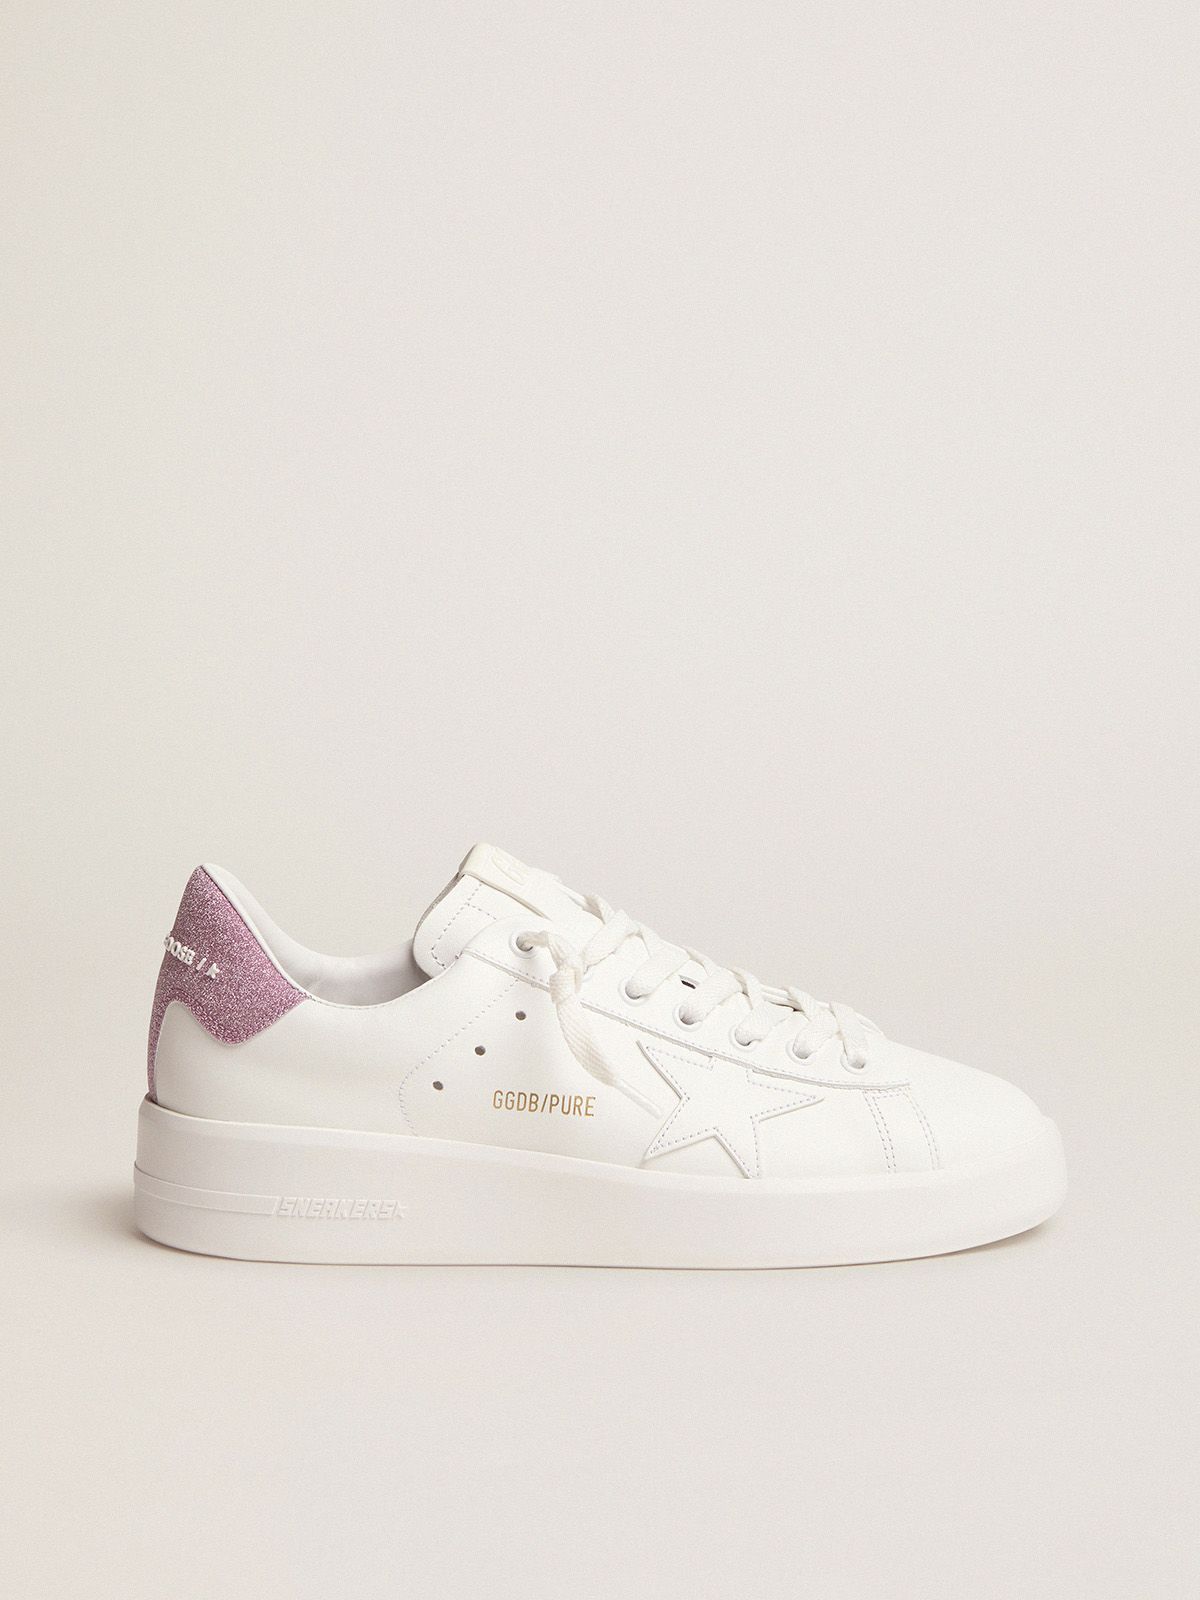 Sneakers Golden Goose Purestar sneakers in white leather with pink glitter heel tab